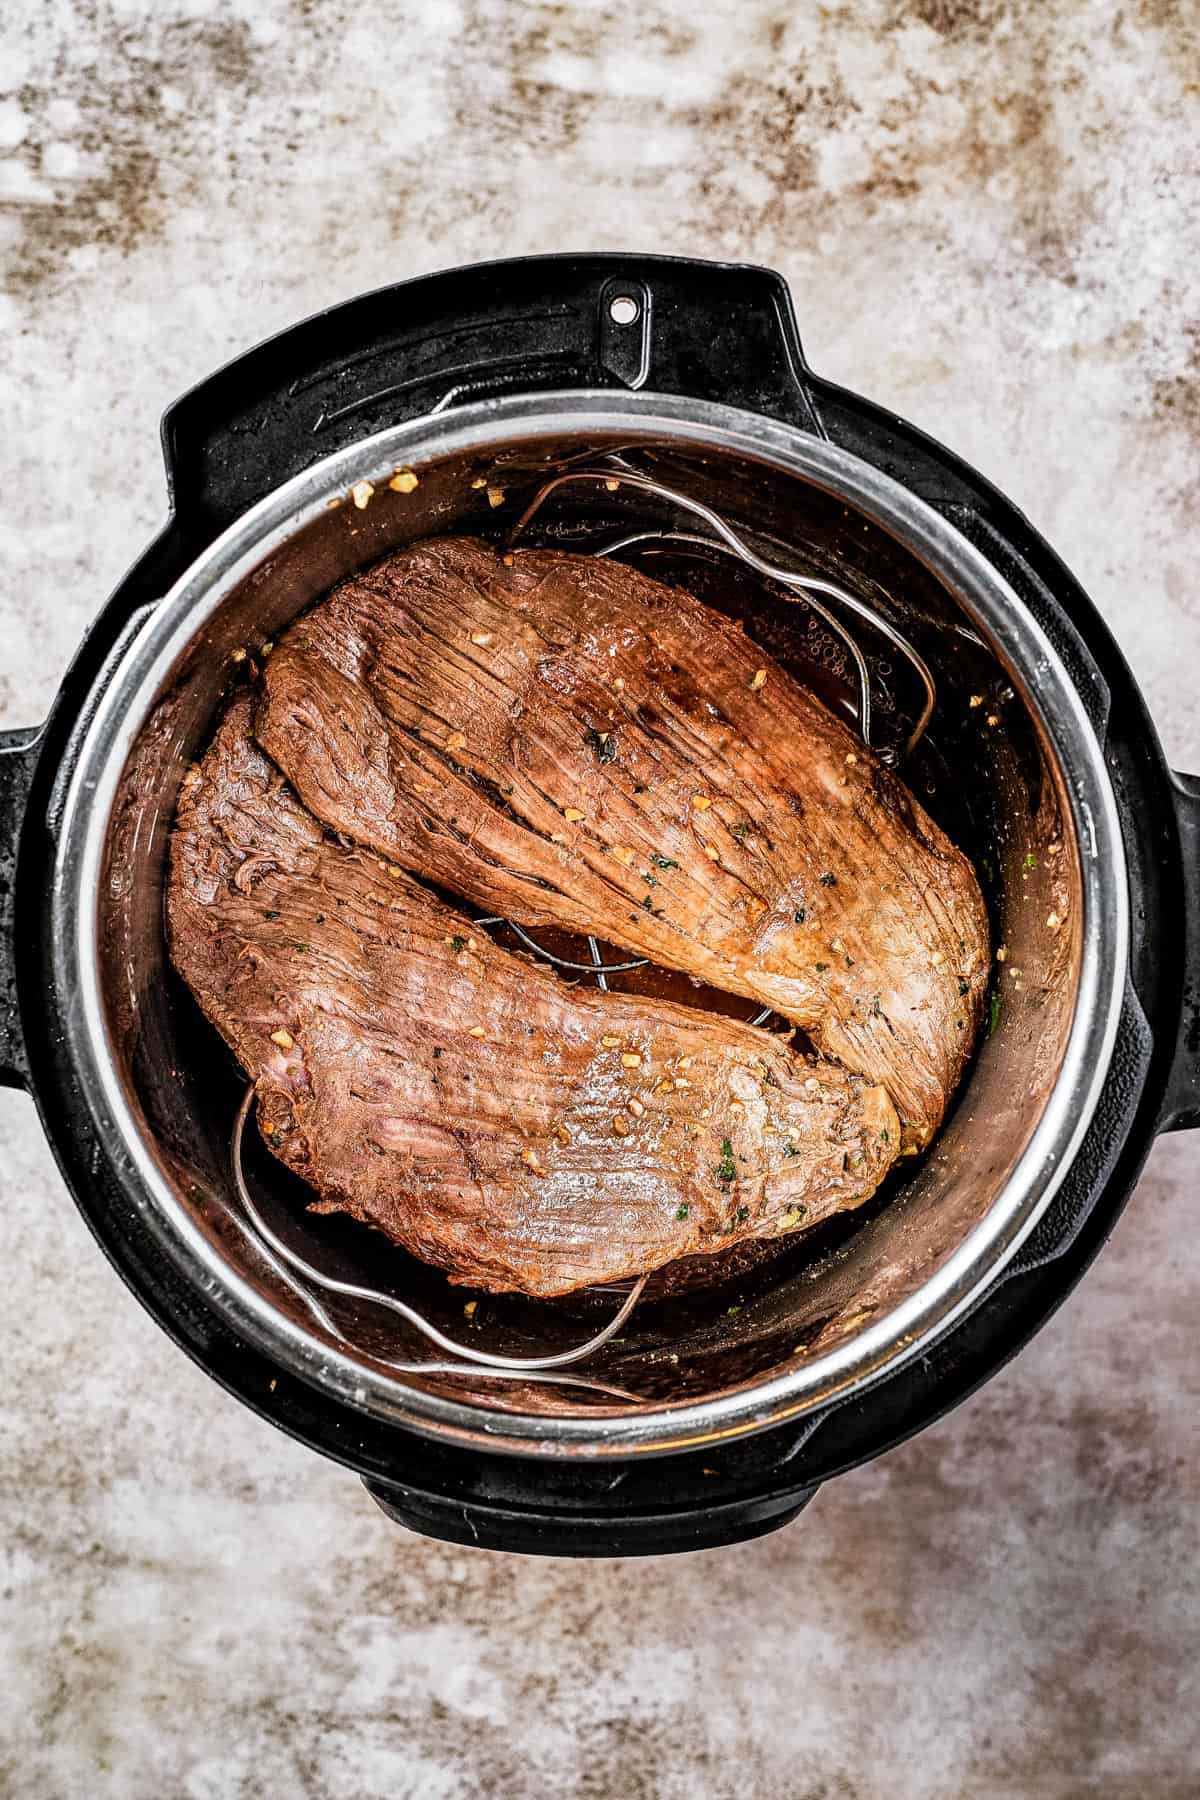 Flank steak browning in an Instant Pot.